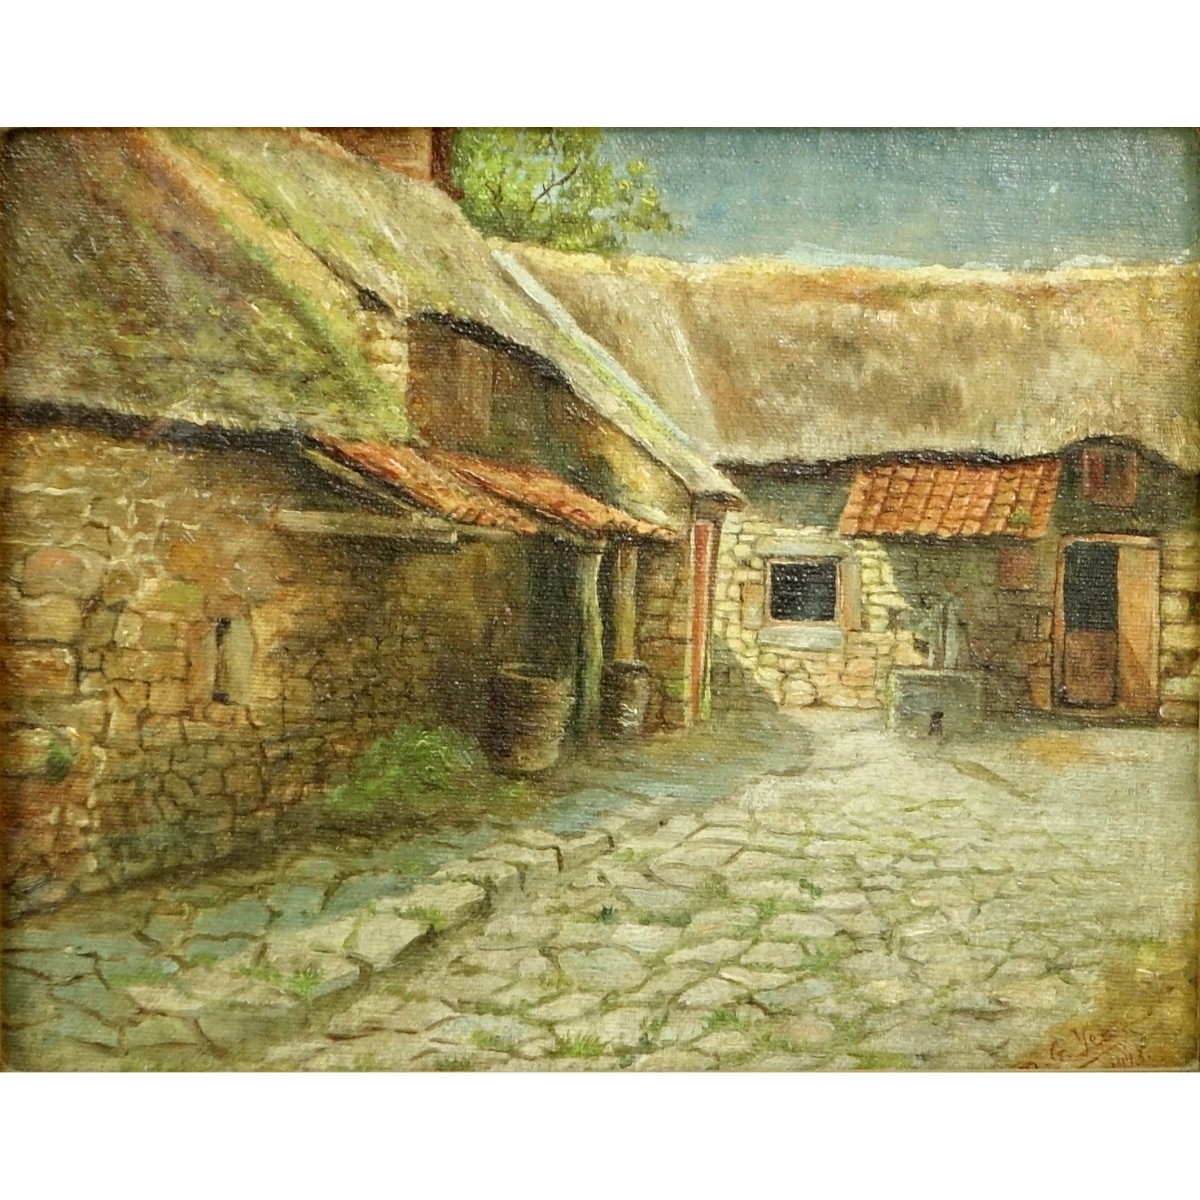 Pair of Antique Oil on Canvasboard, Villages Scene